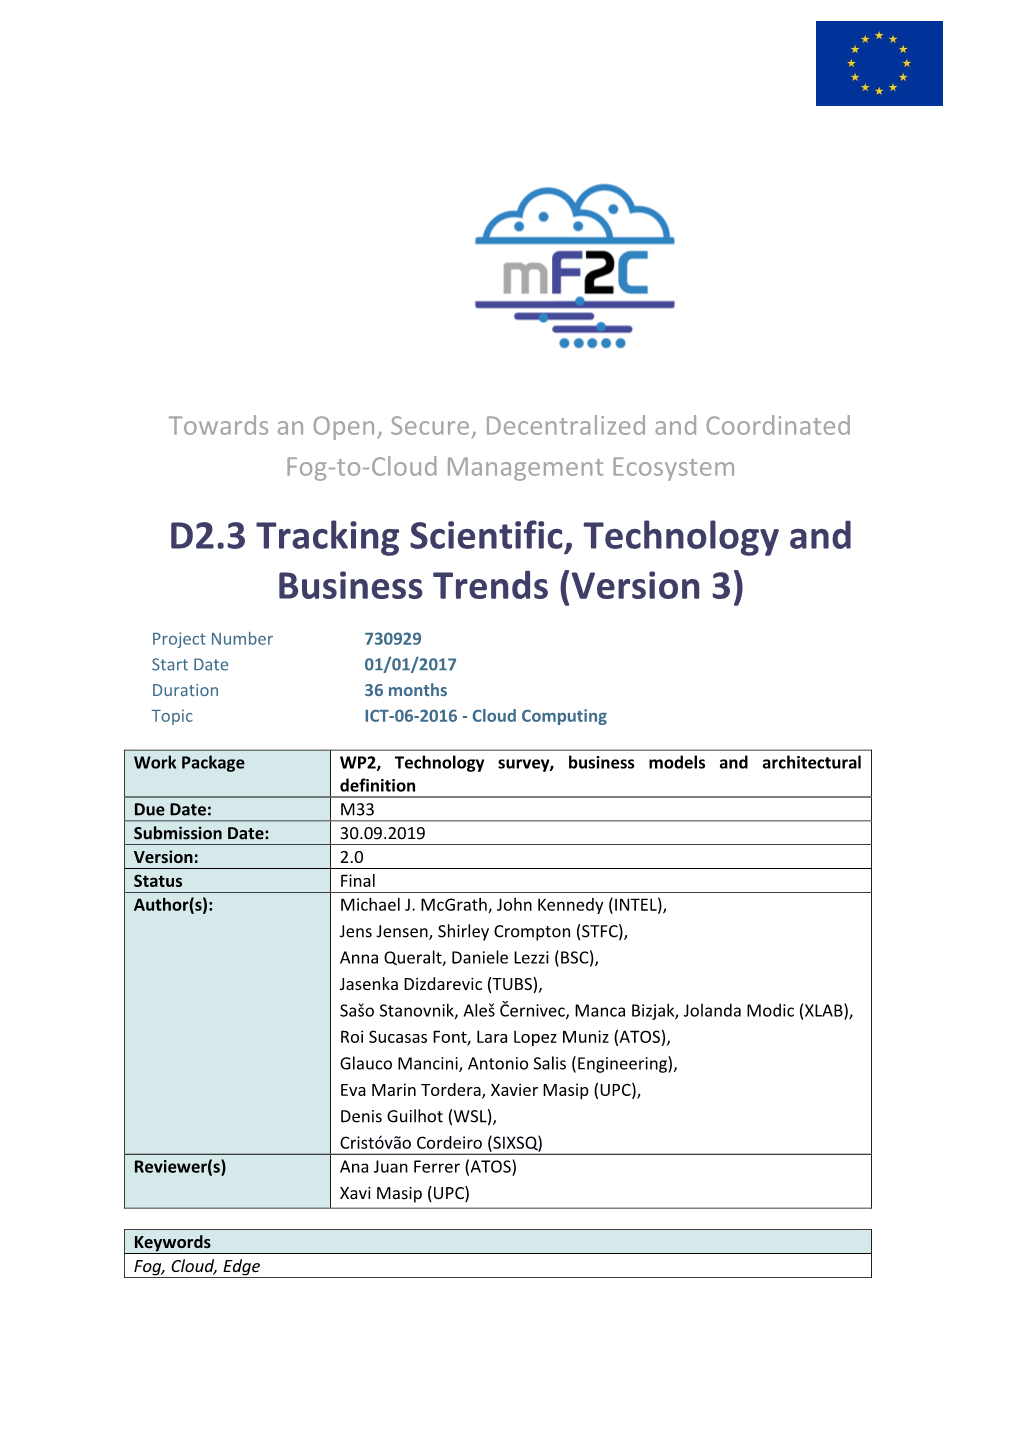 D2.3 Tracking Scientific, Technology and Business Trends (Version 3)